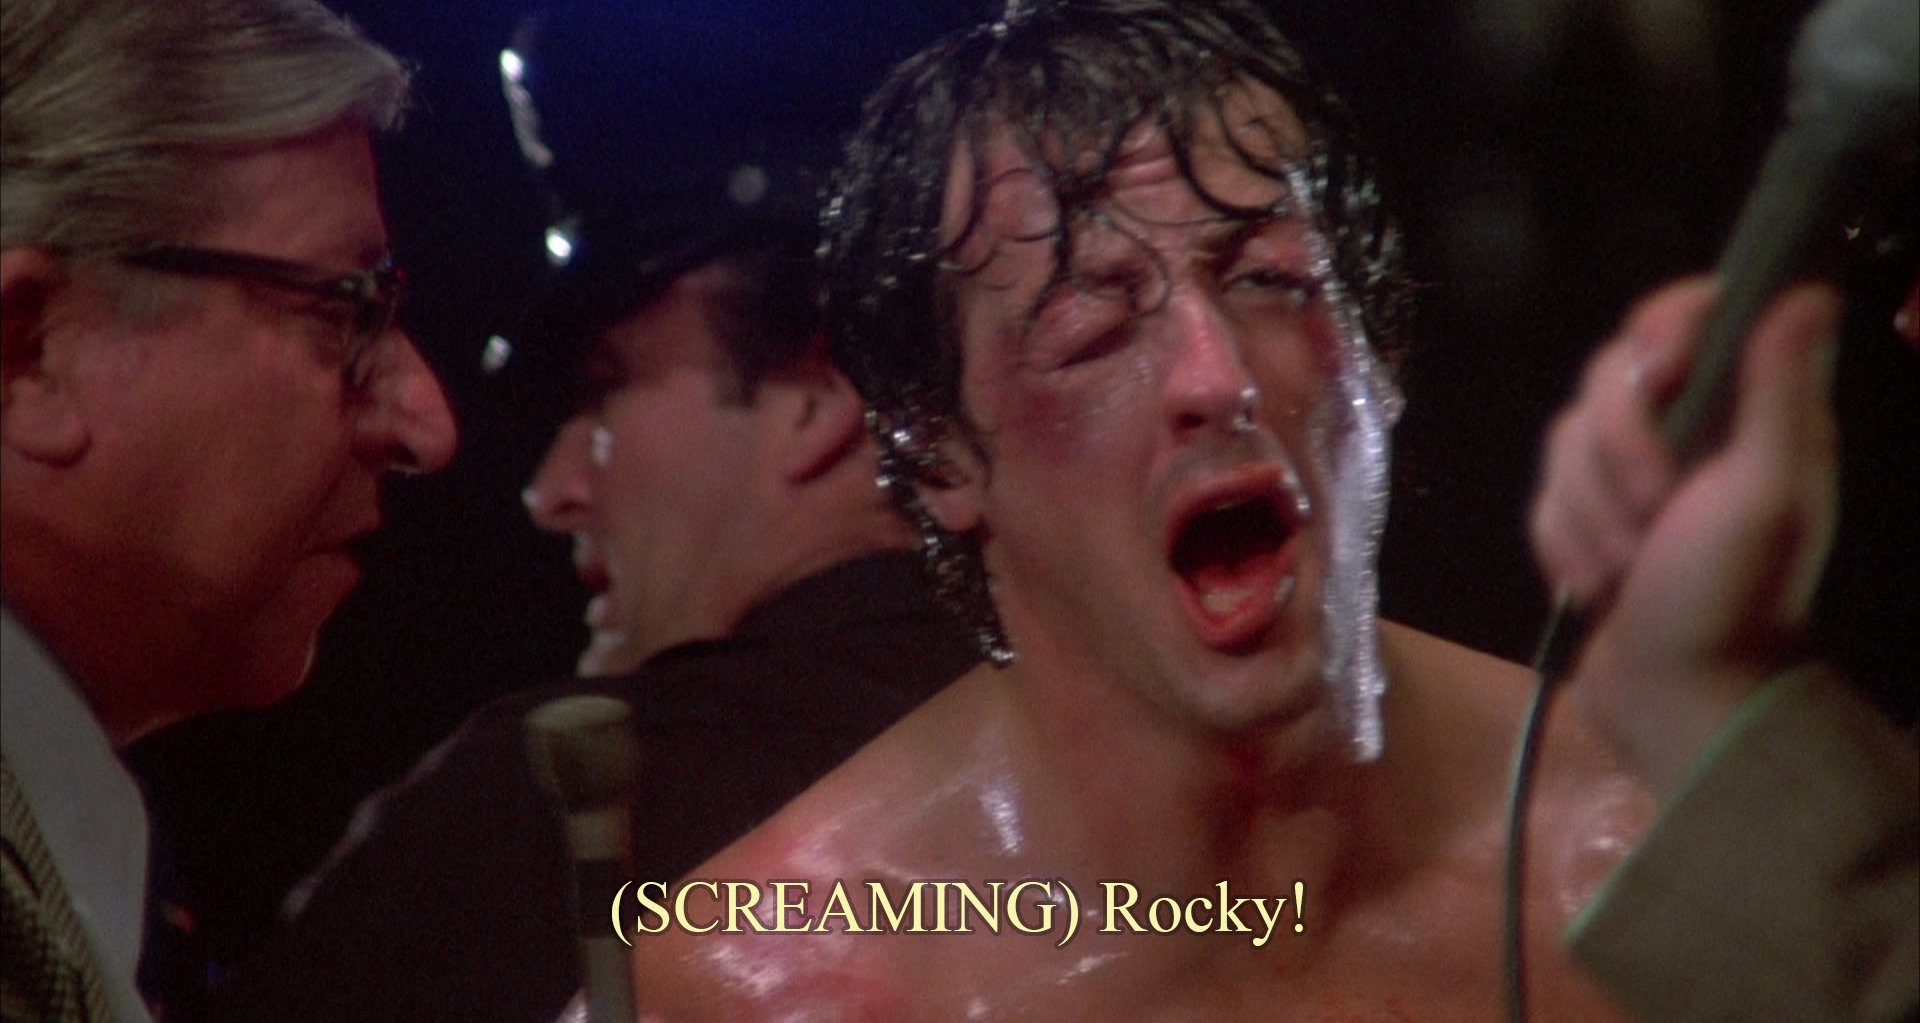 He Didn't Say That -Movie Titles in Movie Lines- rocky beaten - Screaming Rocky!